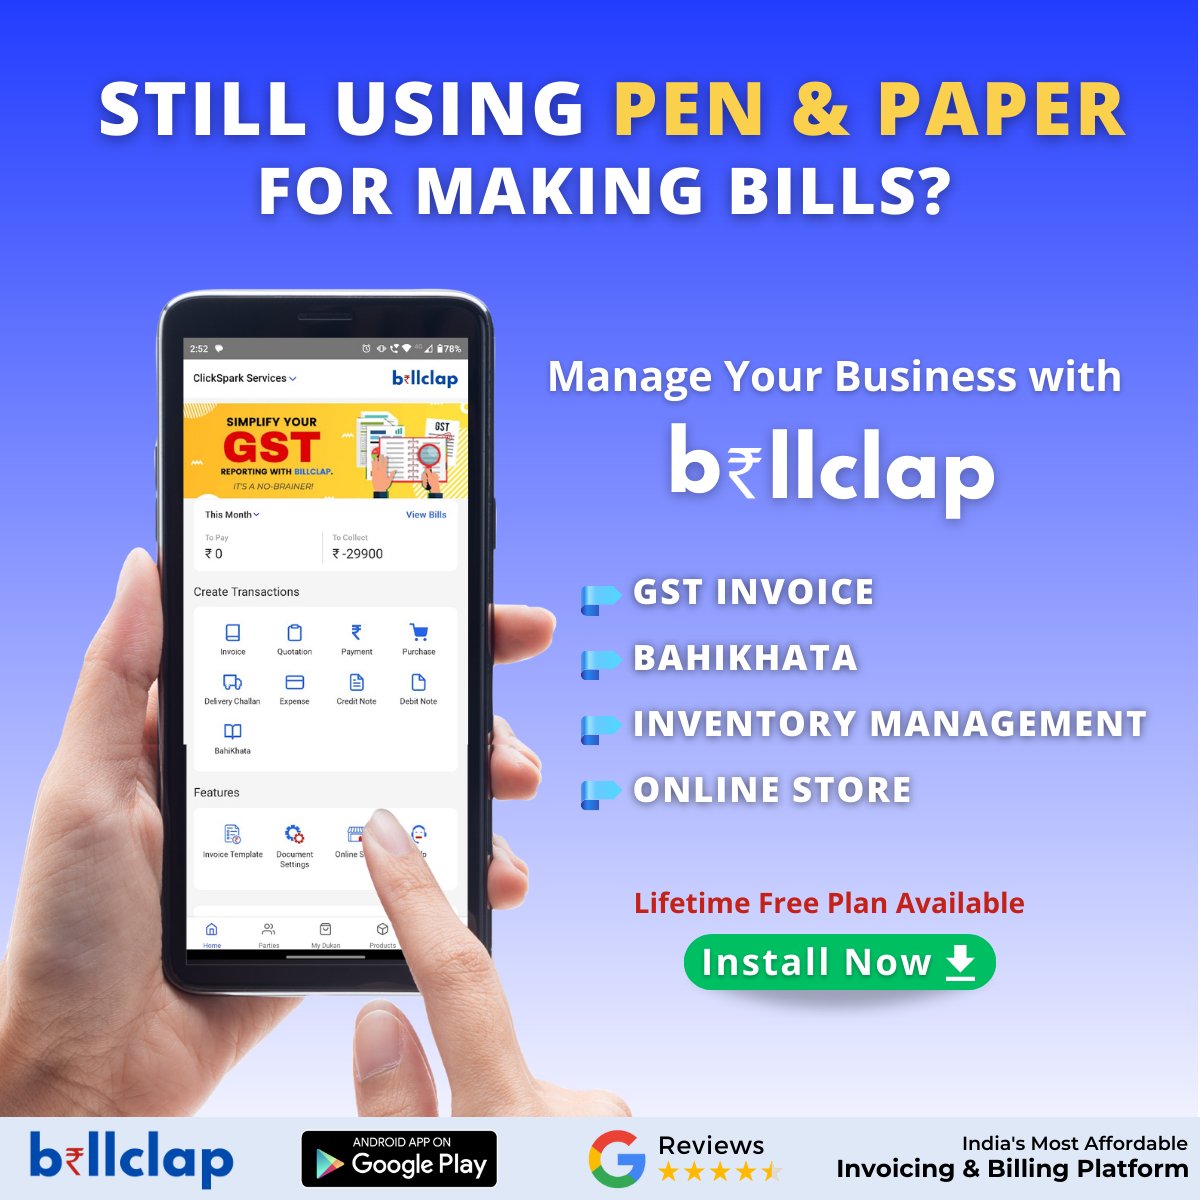 🔥⚡️ Transform Your Business with
BillClap. Stay Ahead by managing your Business like a
Pro!
#SmallBusinessIndia
#EntrepreneurLife
#DigitalPayments
#AccountingSoftware
#FinanceManagement
#OnlineInvoicing
#GSTIndia
#BusinessSolutions
#DigitalIndia
#BusinessOwners
#FinancialFreedom